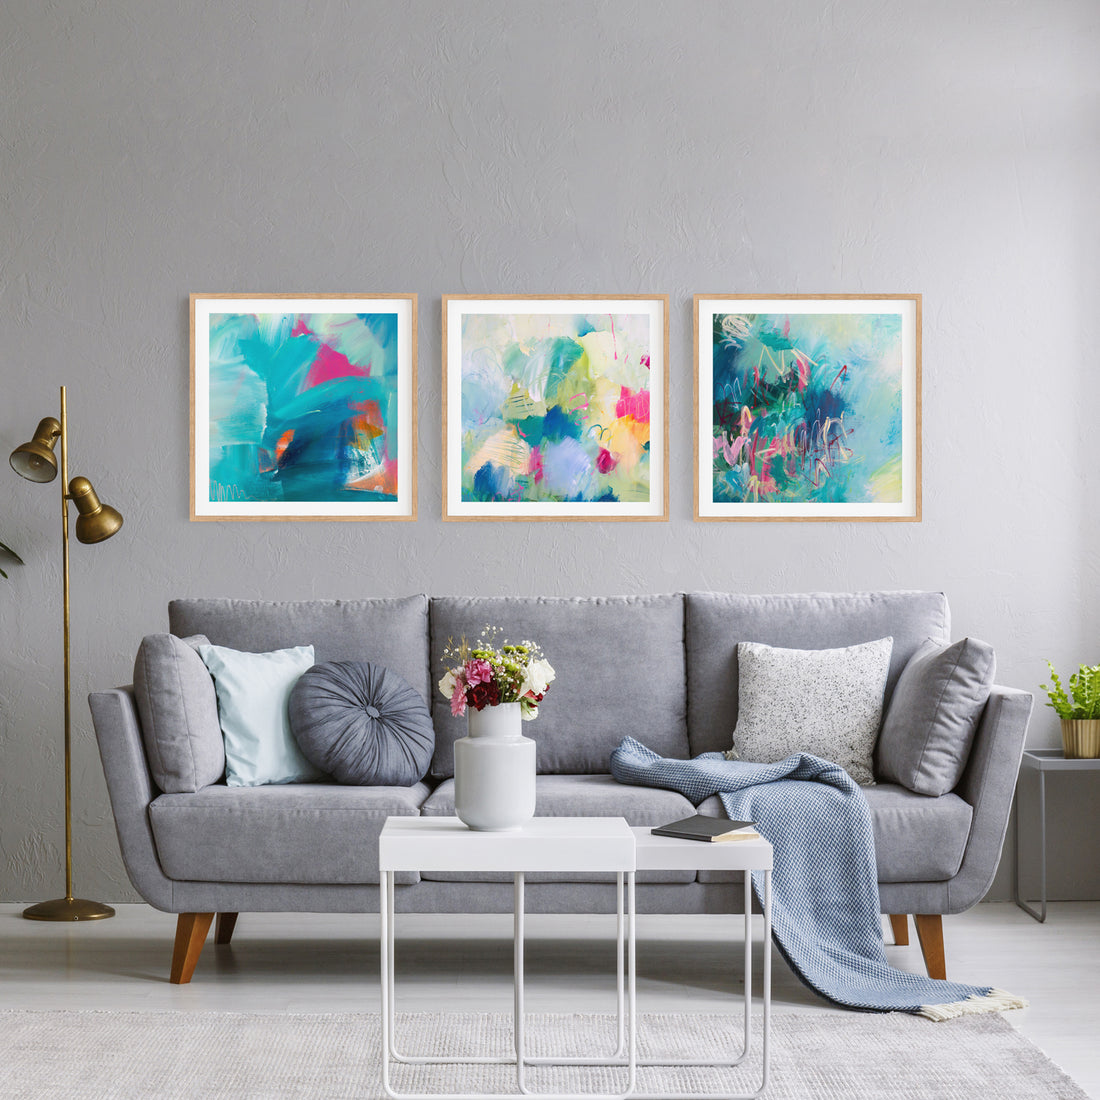 How To Choose The Right Size Art For Your Home